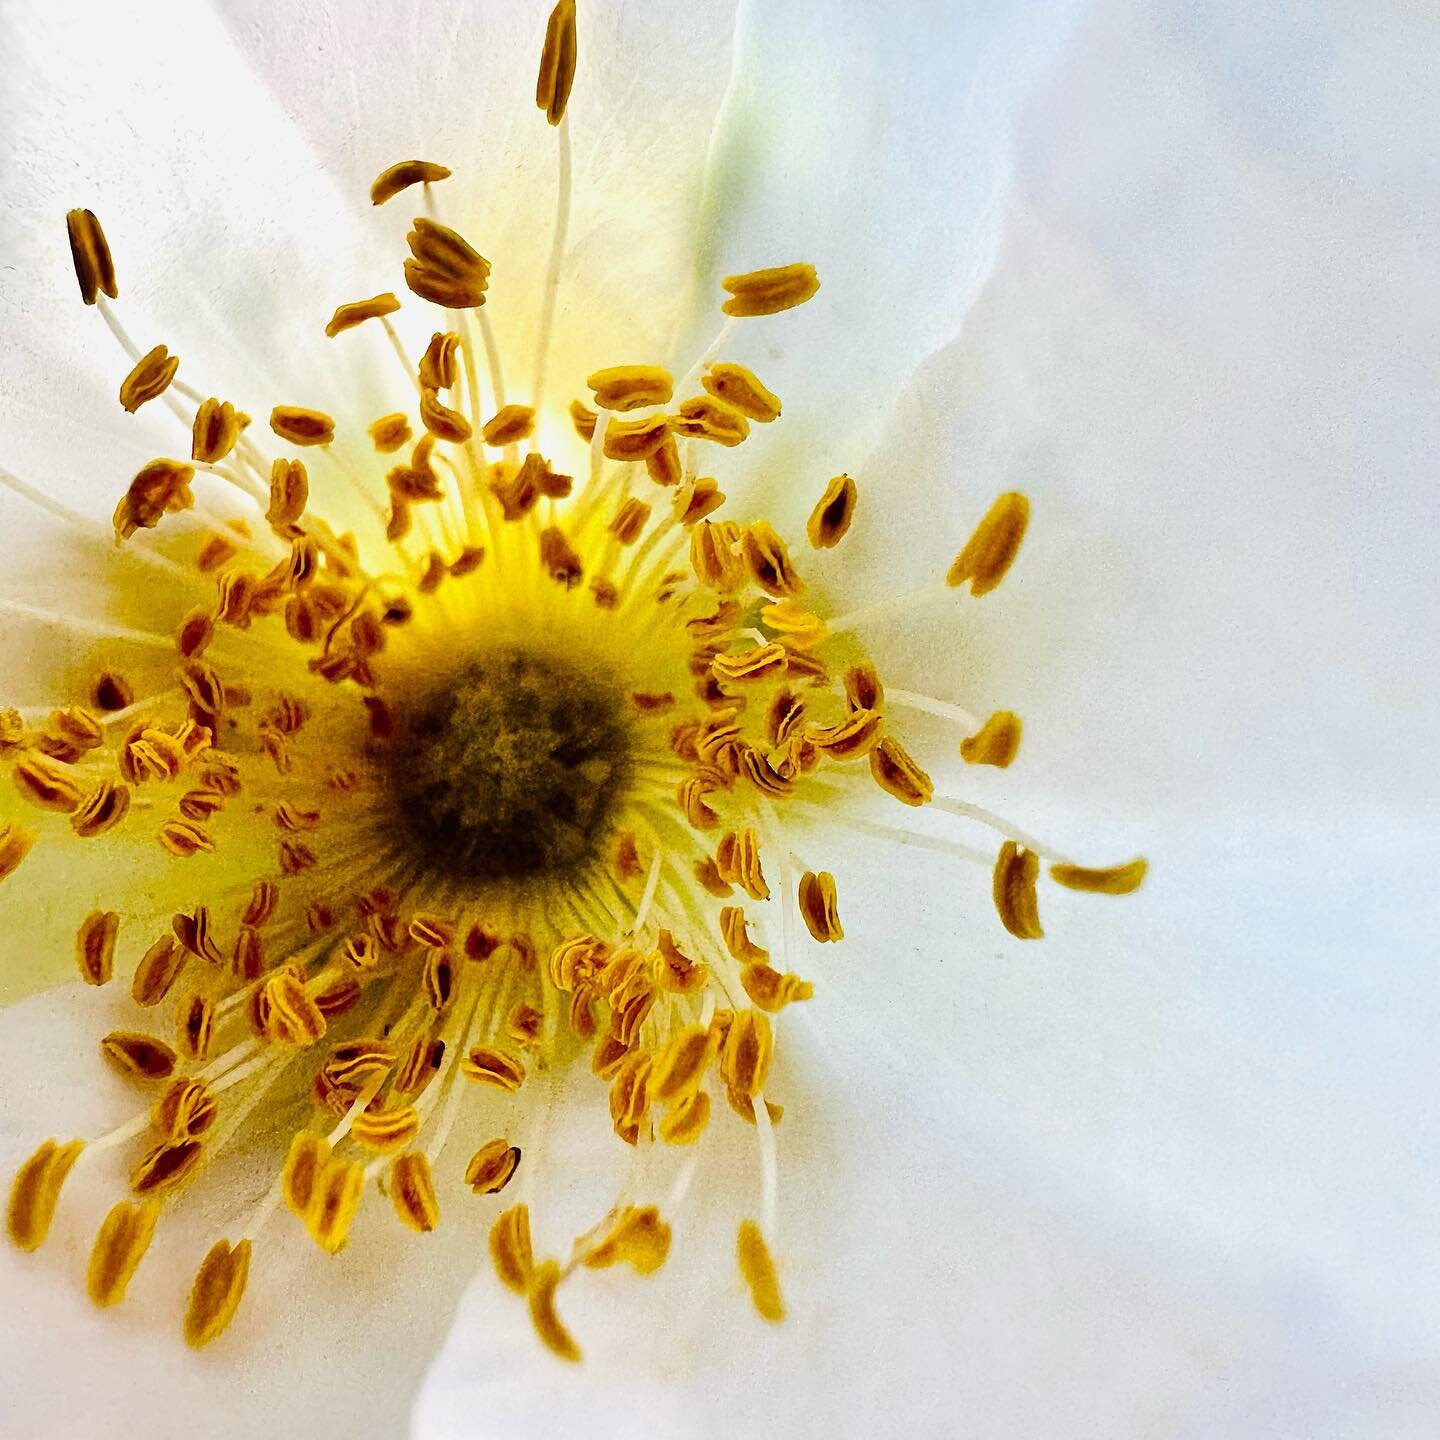 When the #light behind a #flower brightens it up so you can see the #beauty it holds&hellip;

#yellow #white #polinator #macro #art #photography #photolicensing